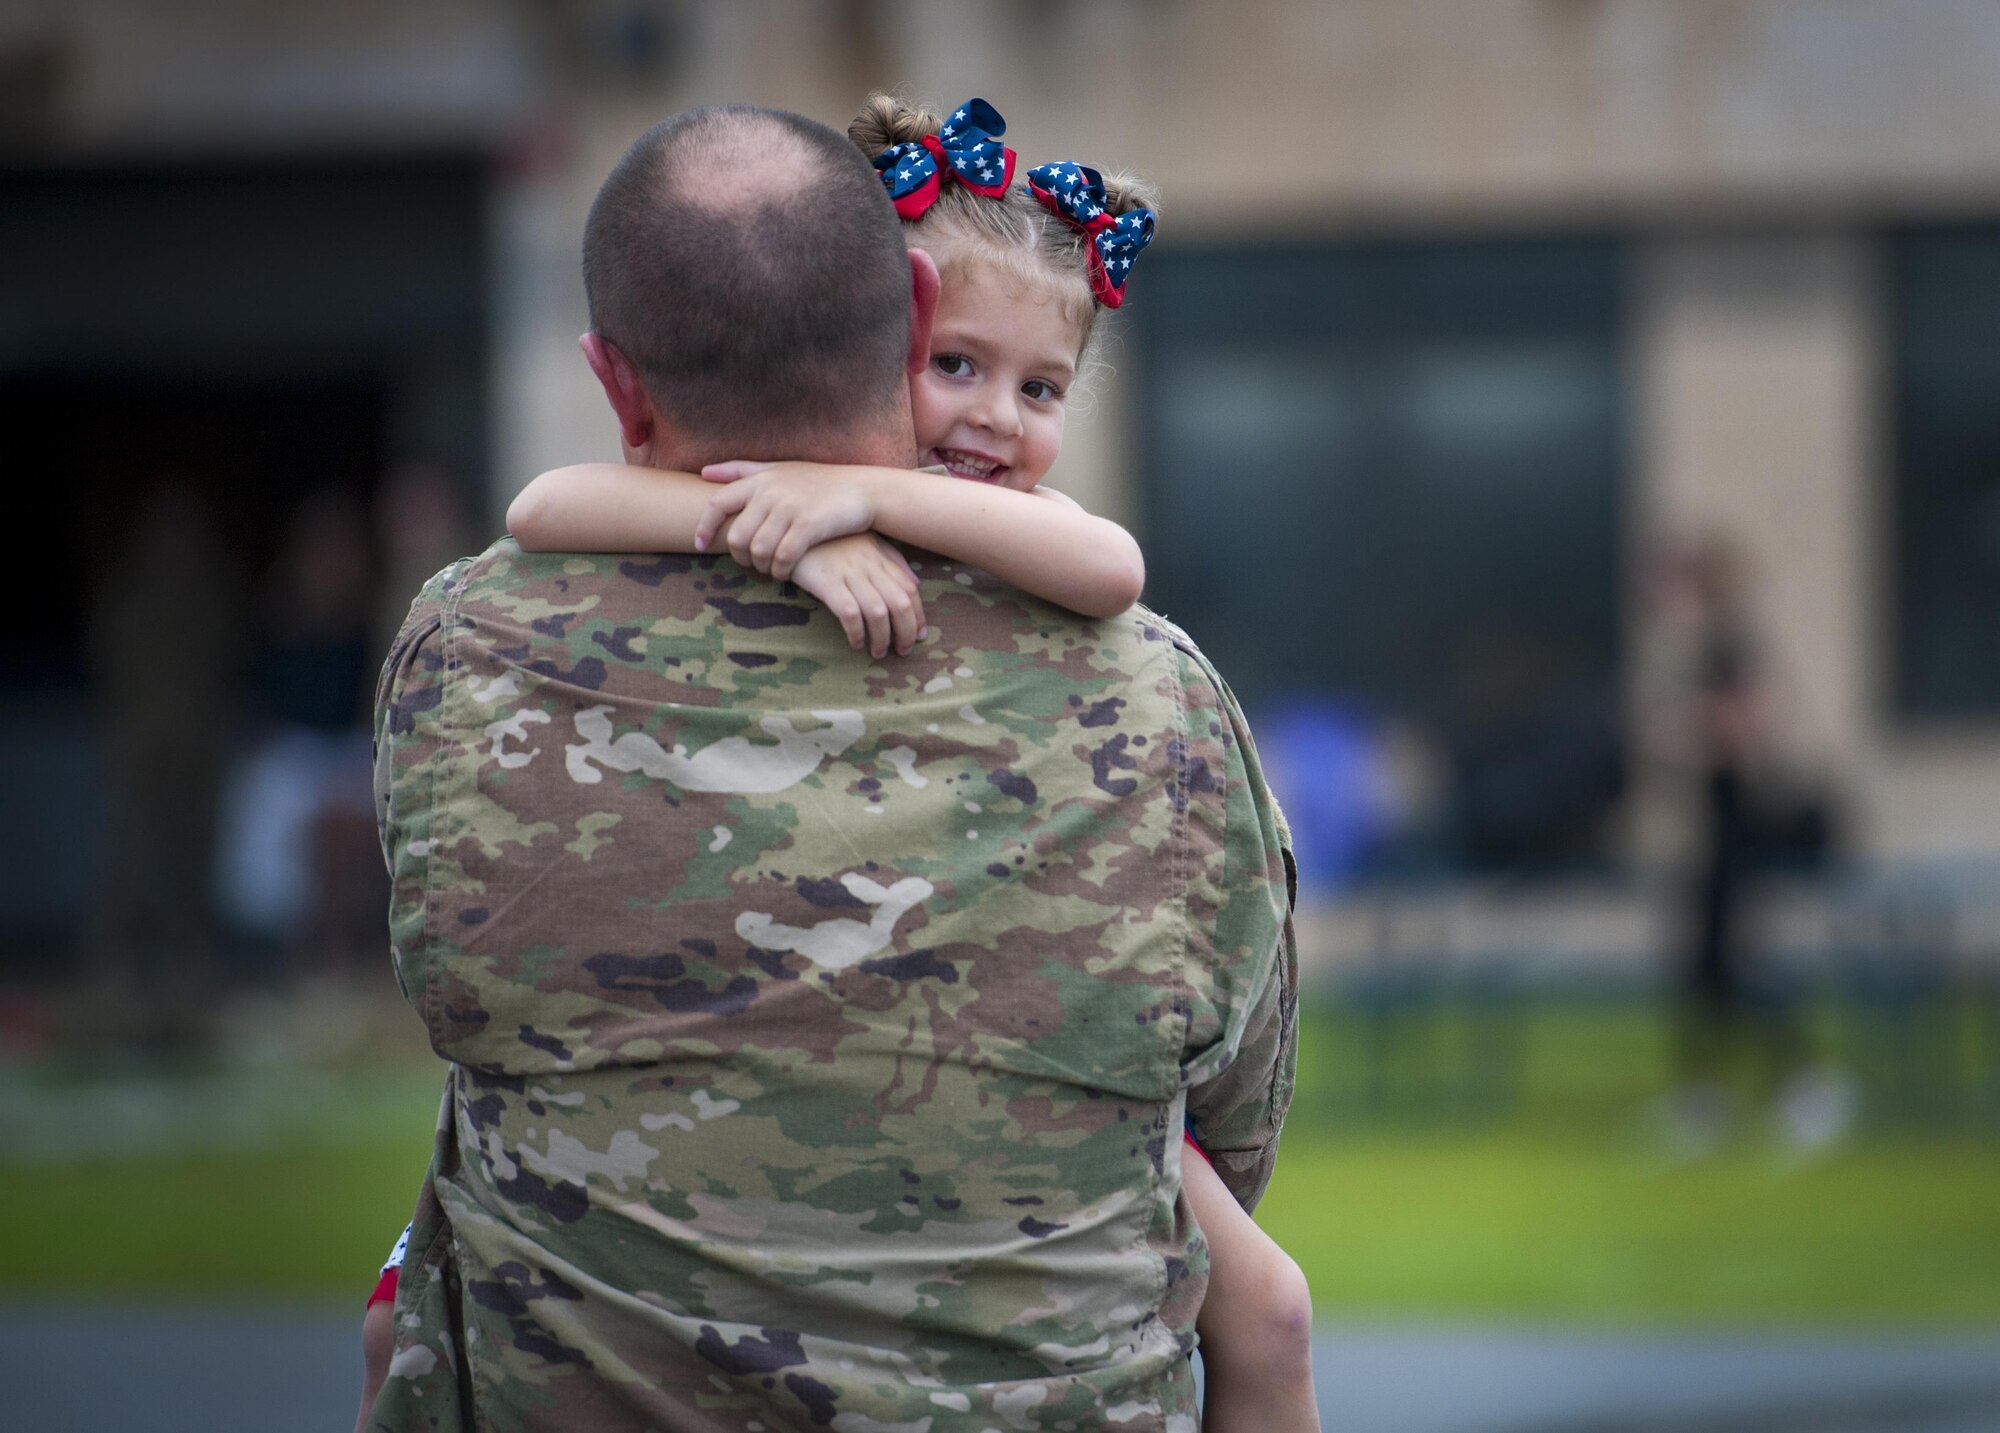 Staff Sgt. Matthew Pearson, 71st Aircraft Maintenance Unit navigation specialist, holds his daughter, Savannah, during a redeployment, June 6, 2017, at Moody Air Force Base, Ga. The 41st and 71st Rescue Squadrons were recently deployed to Southwest Asia where they provided combat search and rescue capabilities in support of Operation Inherent Resolve. (U.S. Air Force photo by Airman 1st Class Lauren M. Sprunk)